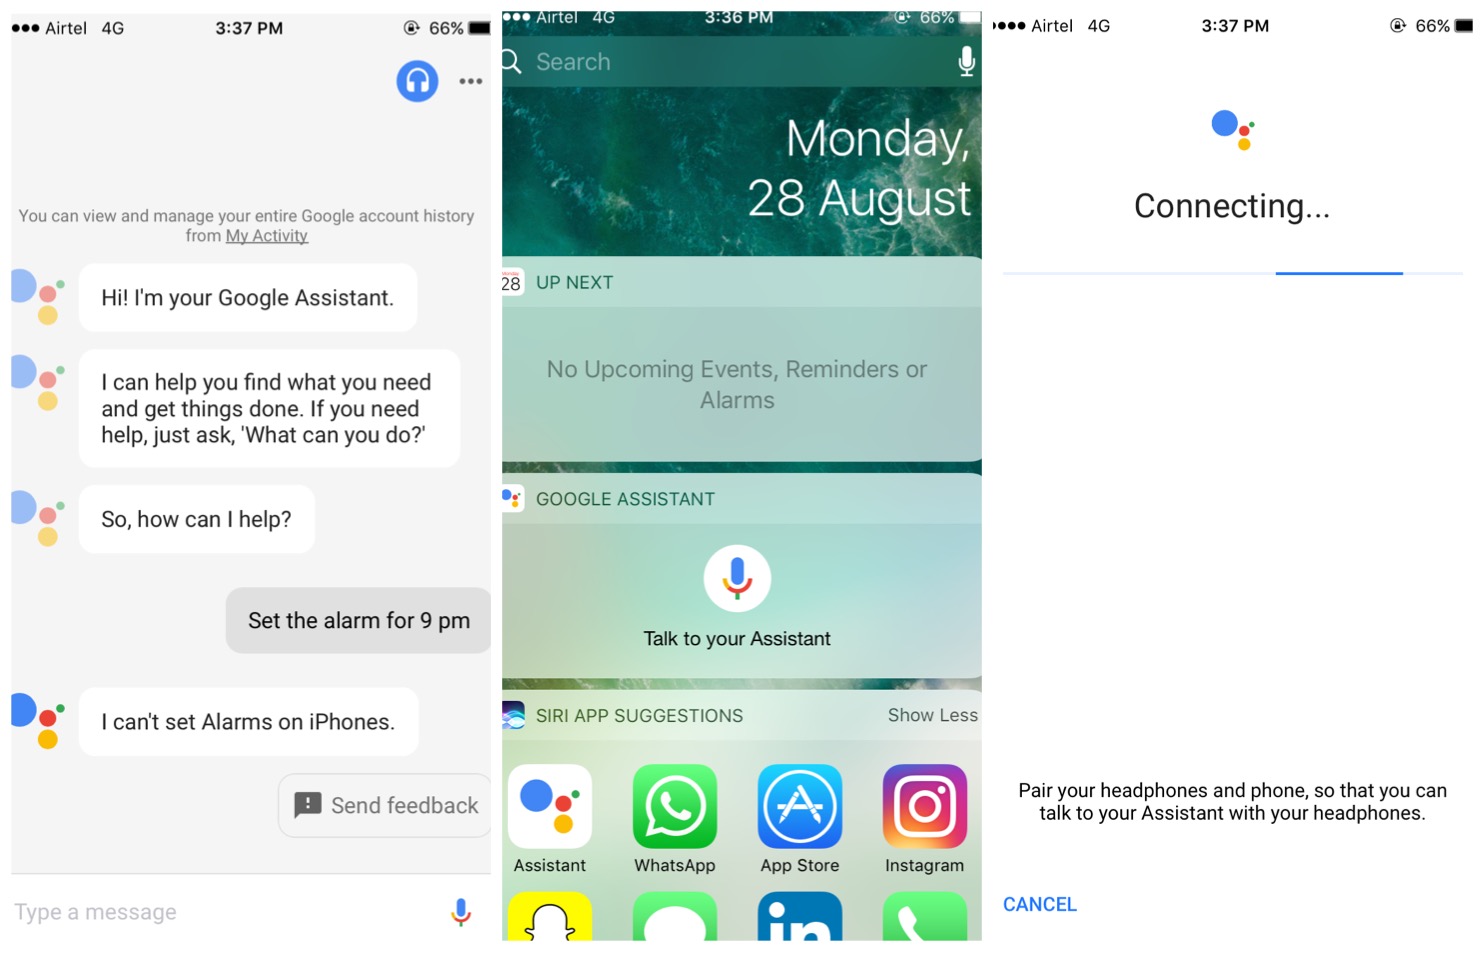 Google Assistant for iOS now available in India